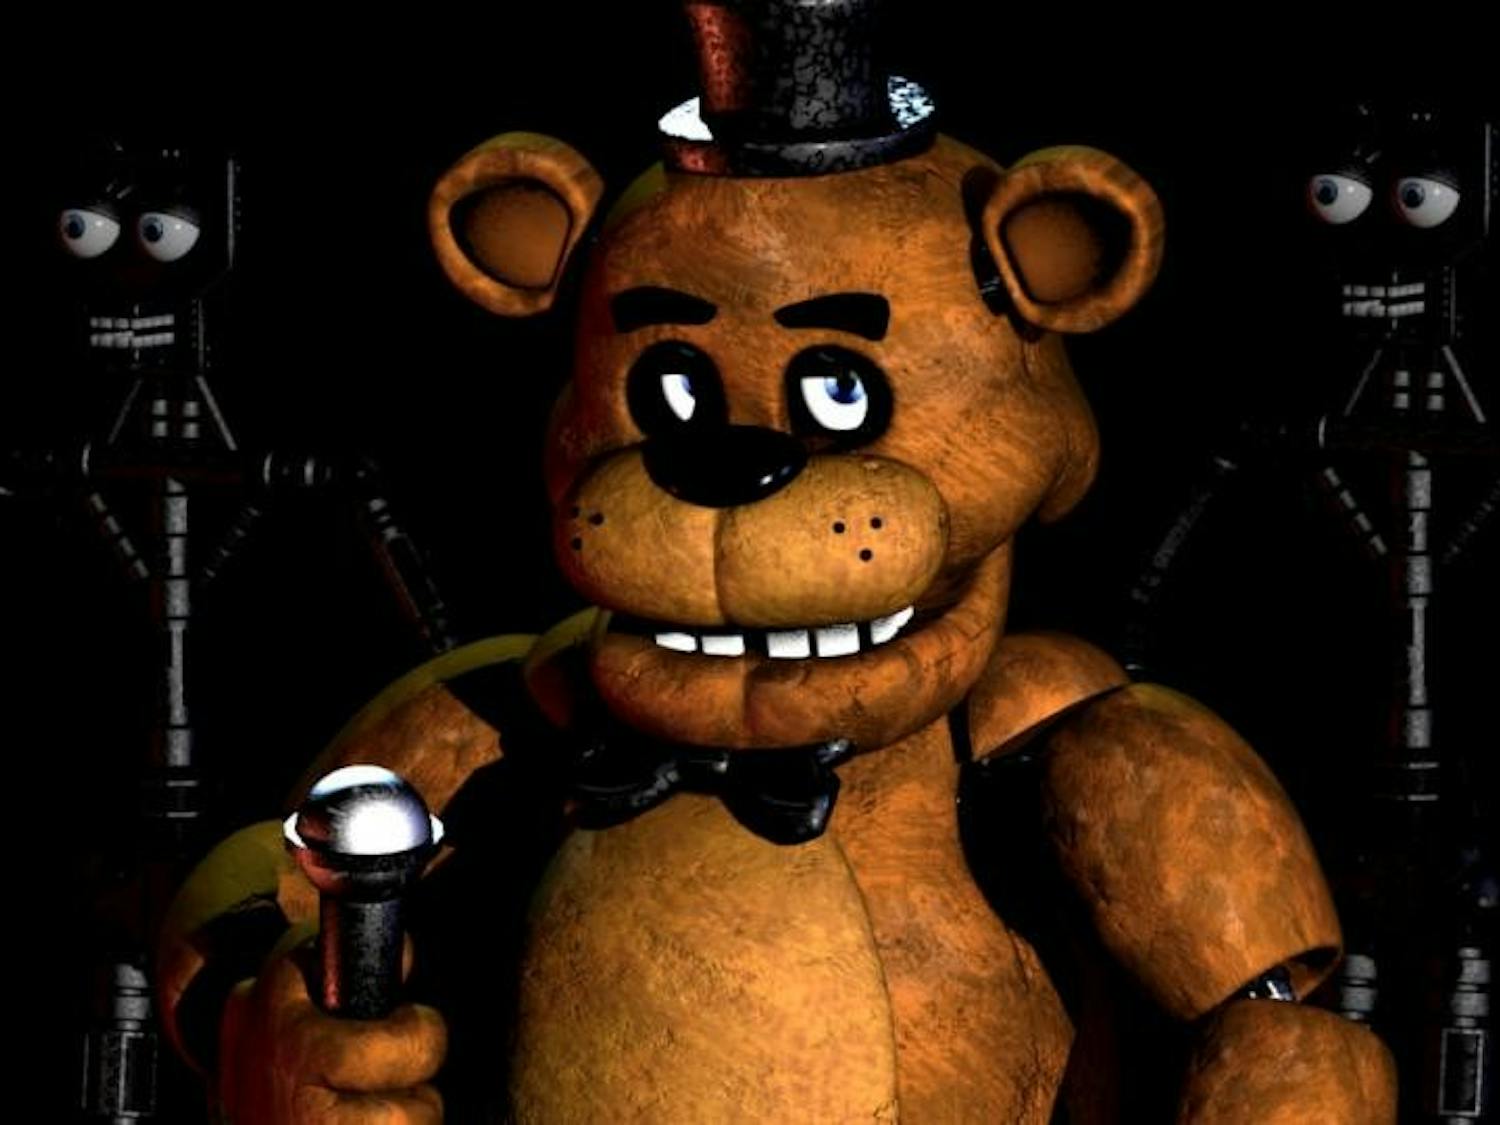 Freddy Fazbear is the evil, animatronic villain of "Five Nights at Freddy's," a popular&nbsp;indie game developed by Scott Cawthon. &nbsp;Courtesy: ScottGames/Steam